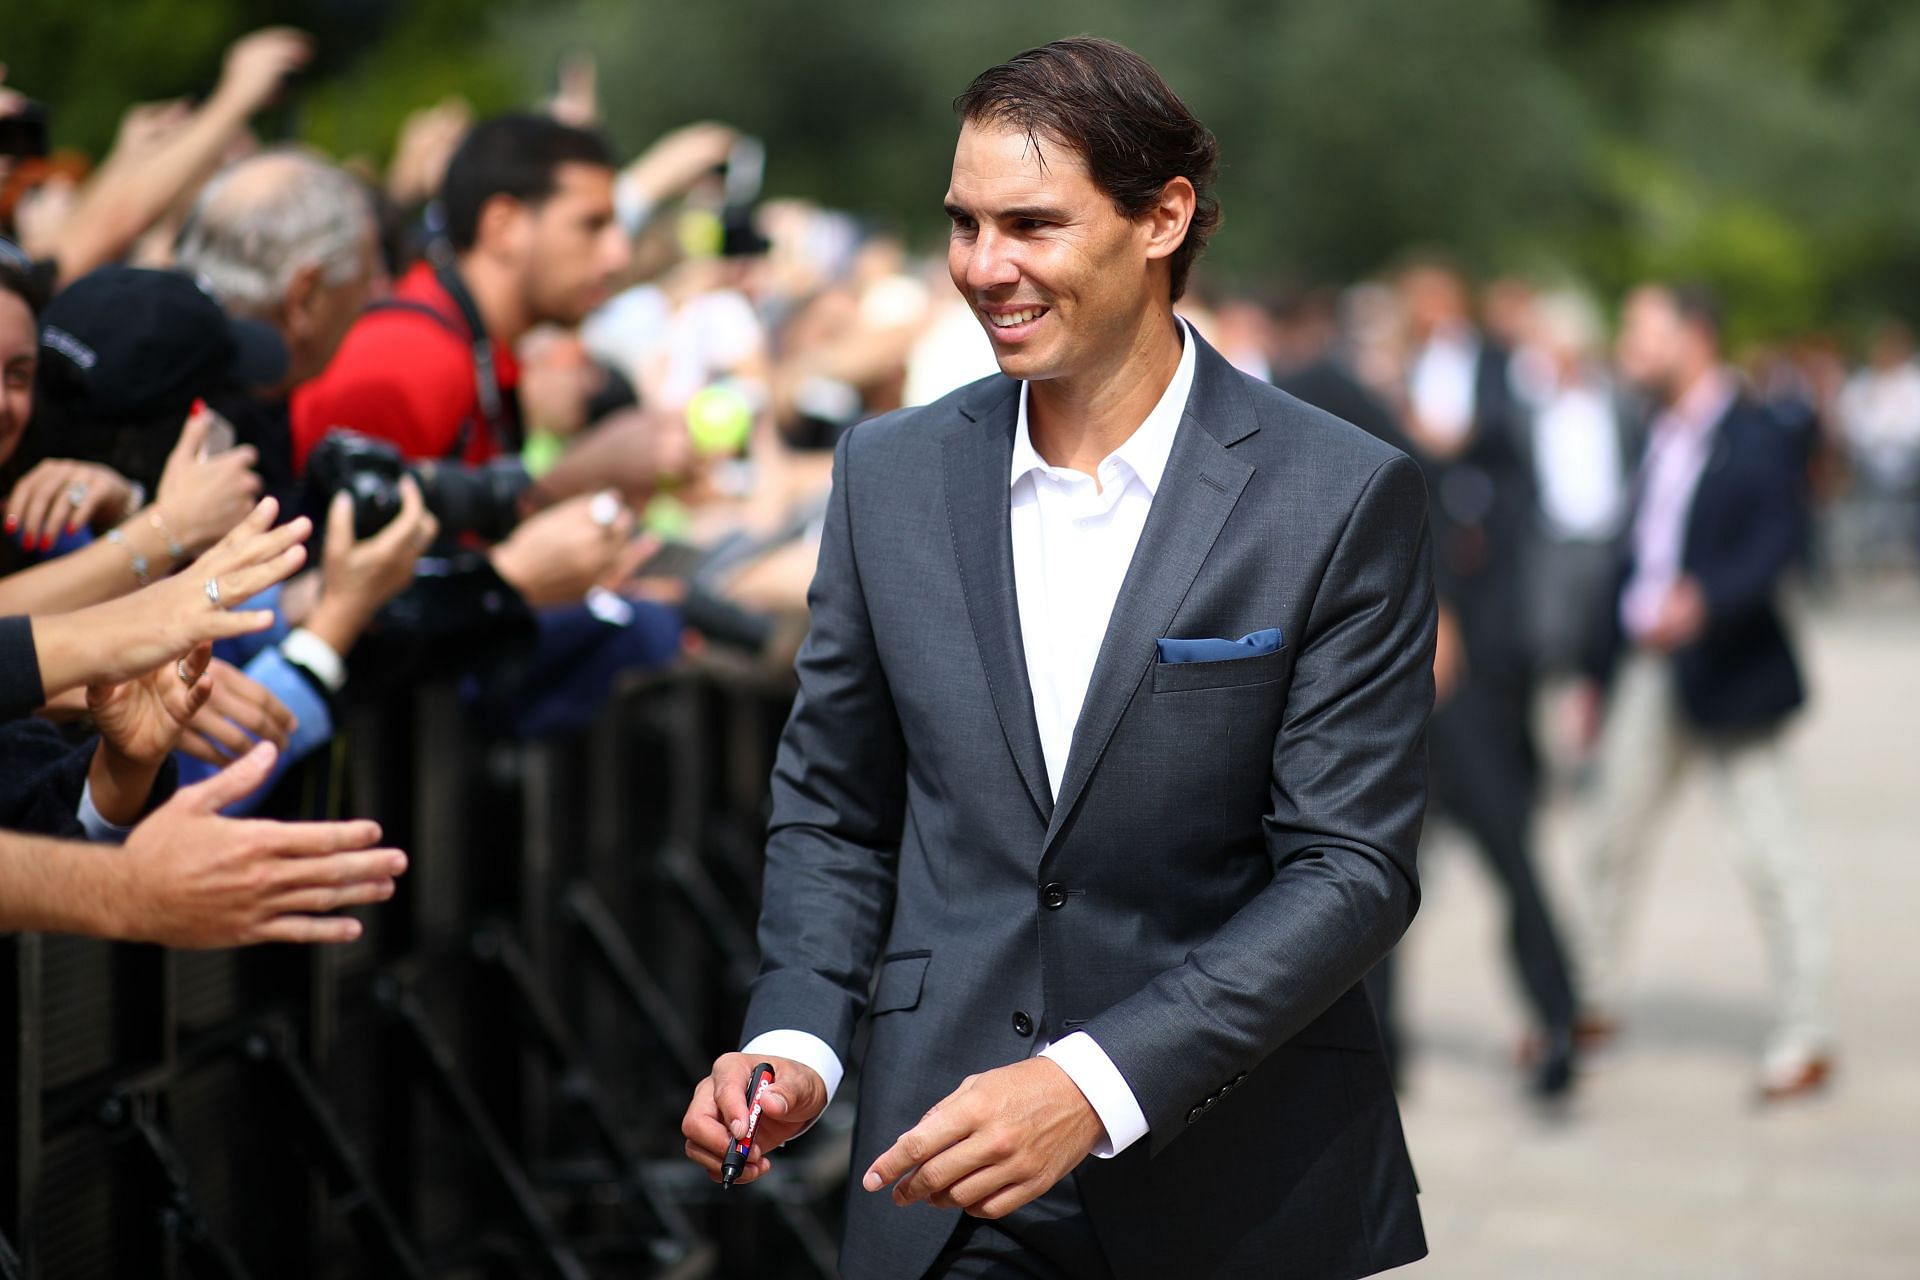 Rafael Nadal ahead of the 2019 Laver Cup